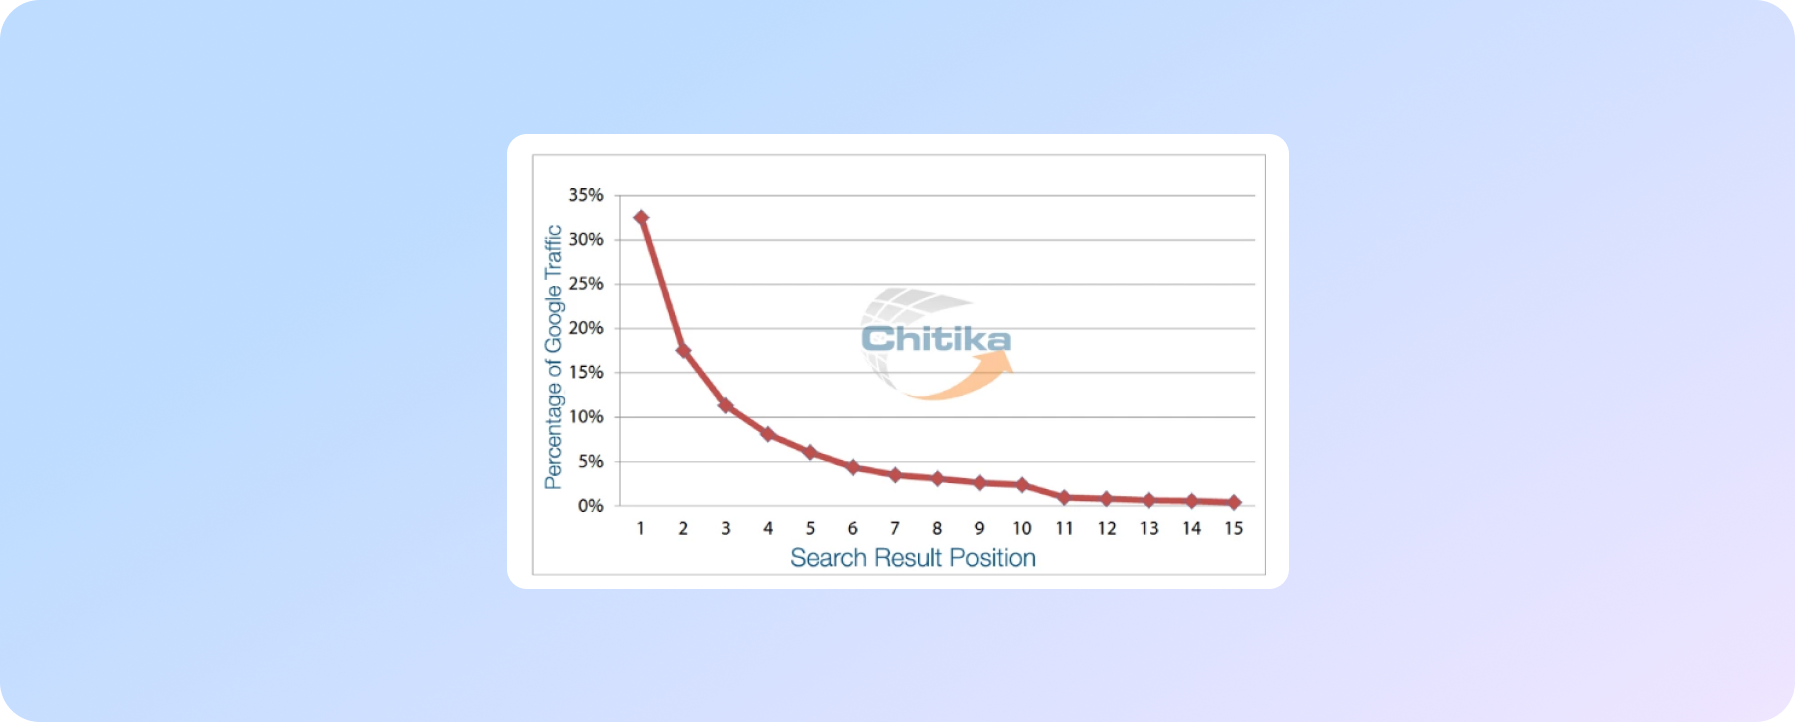 Research of the Chitika advertising company : the ratio of traffic to the position in the organic